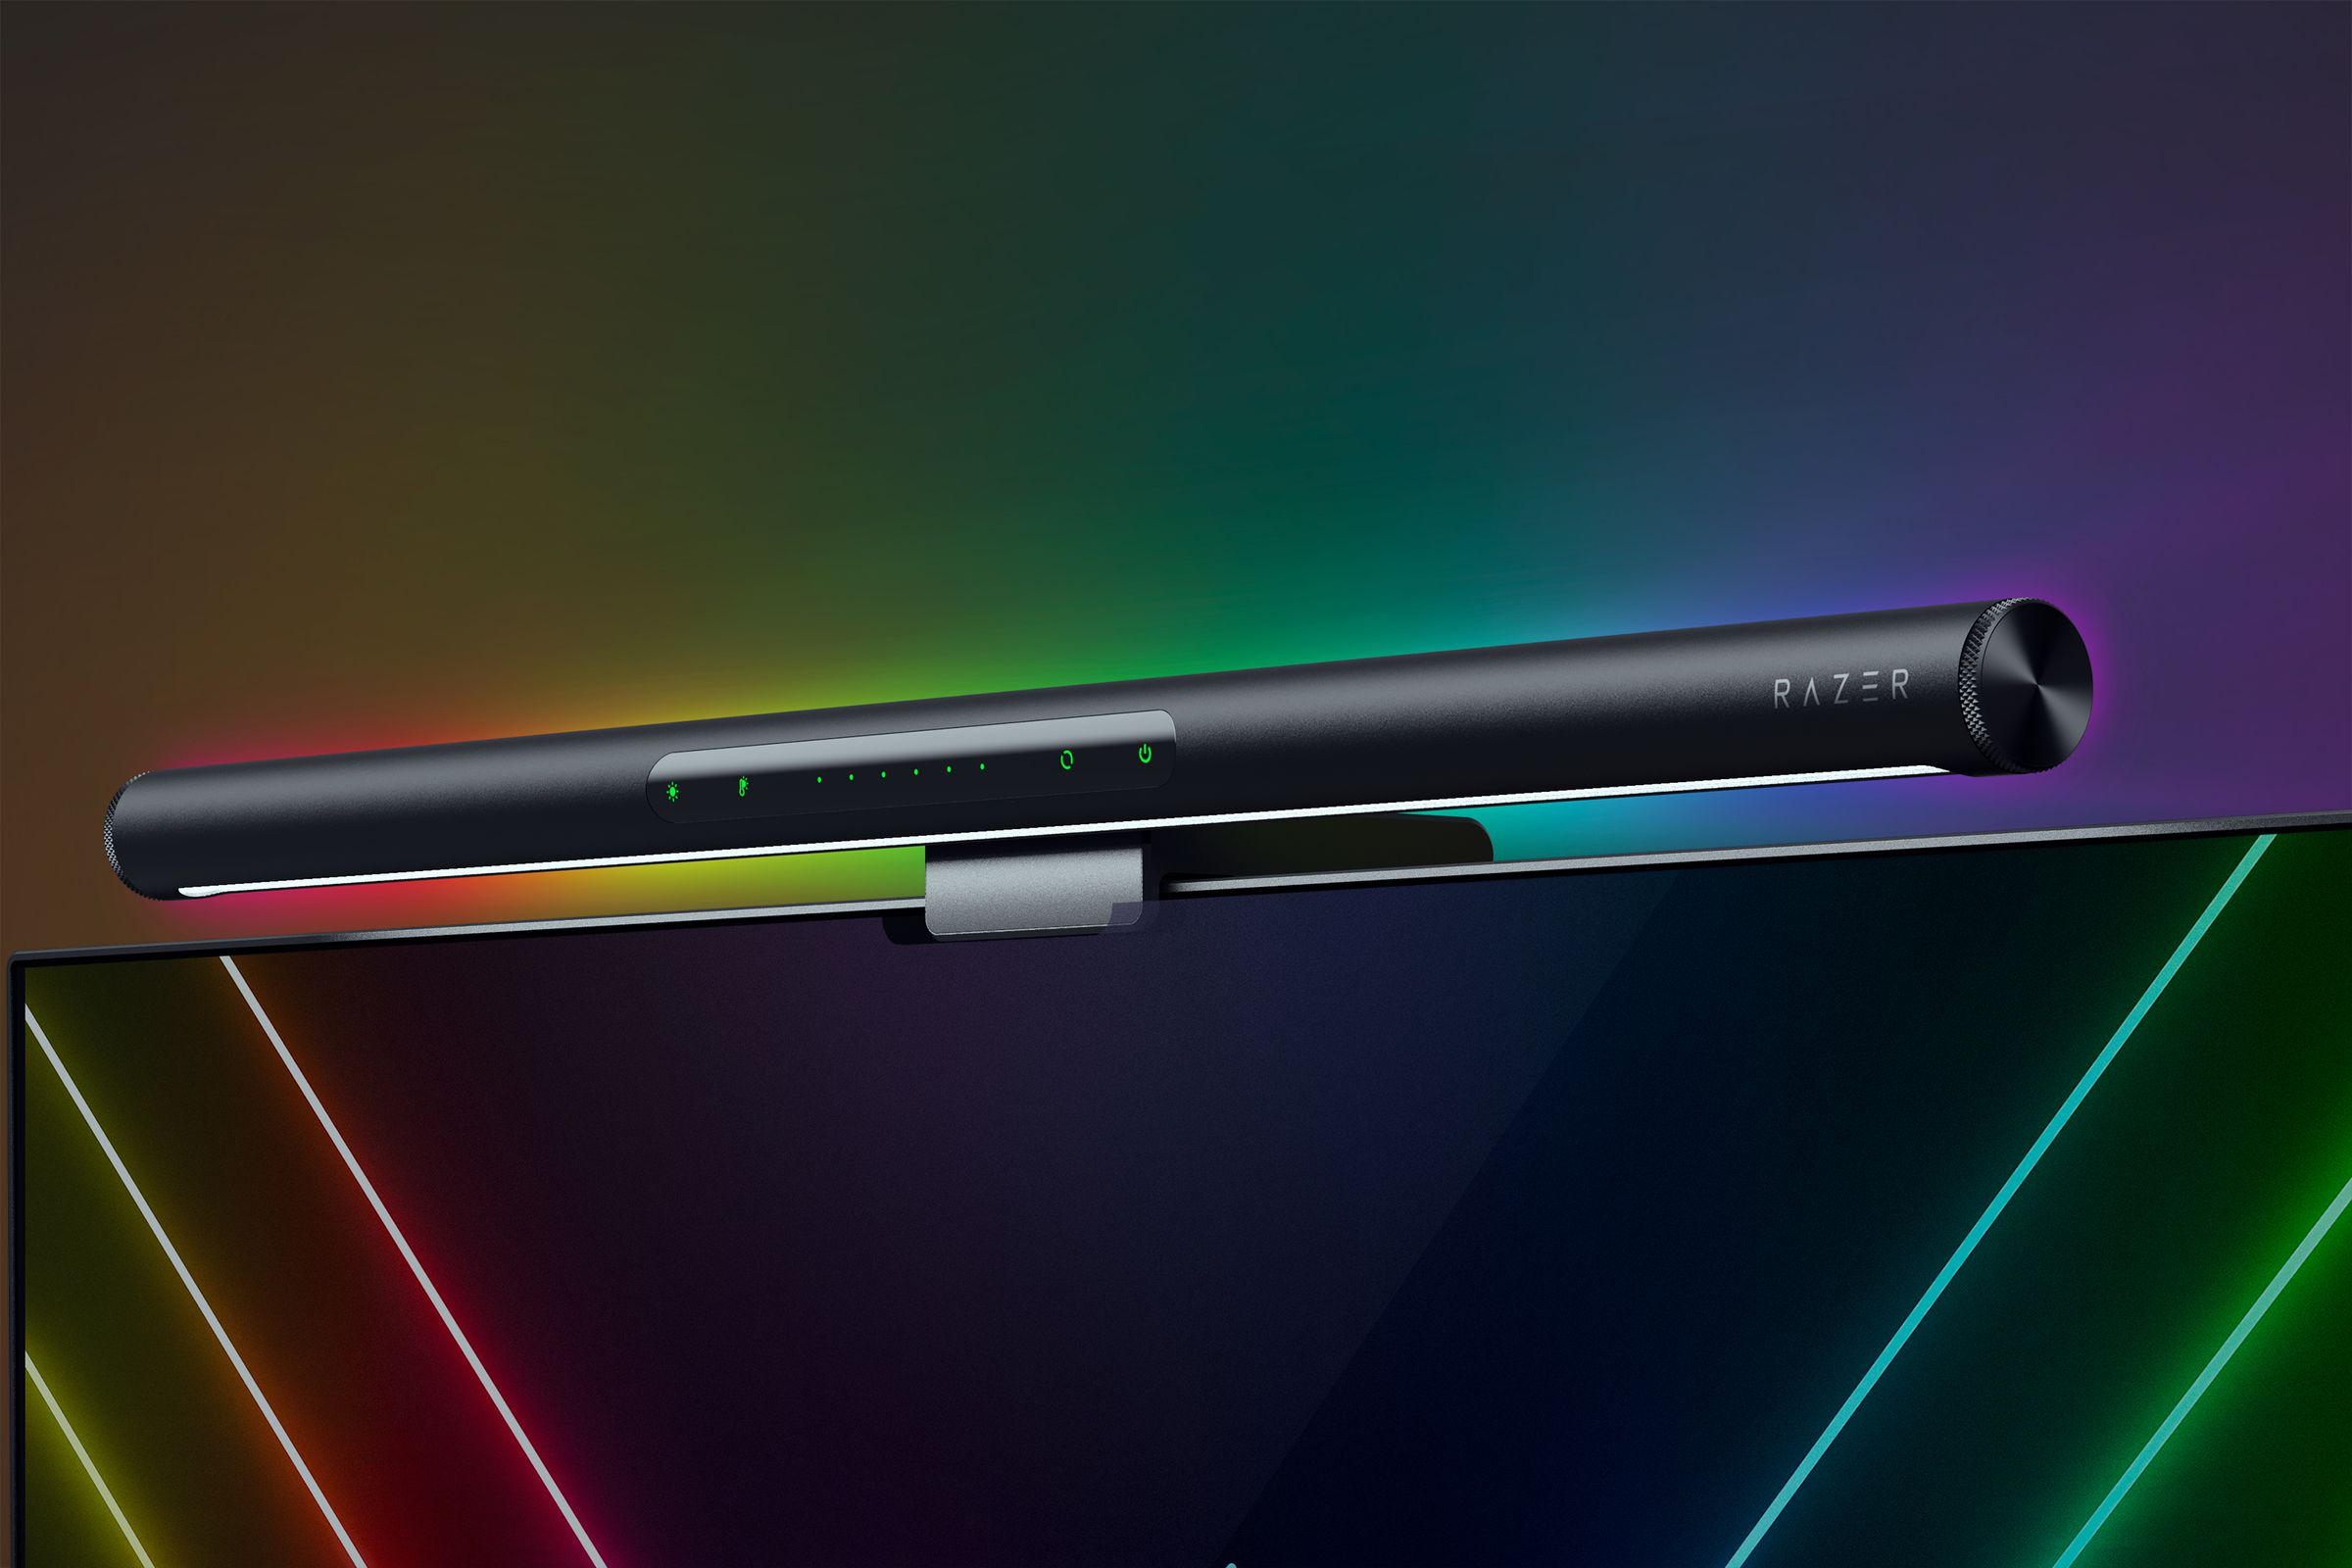 Rendering of a monitor light bar with a white LED strip on the front underside and RGB lighting visible from the back. It is perched on a monitor in front of a black background.